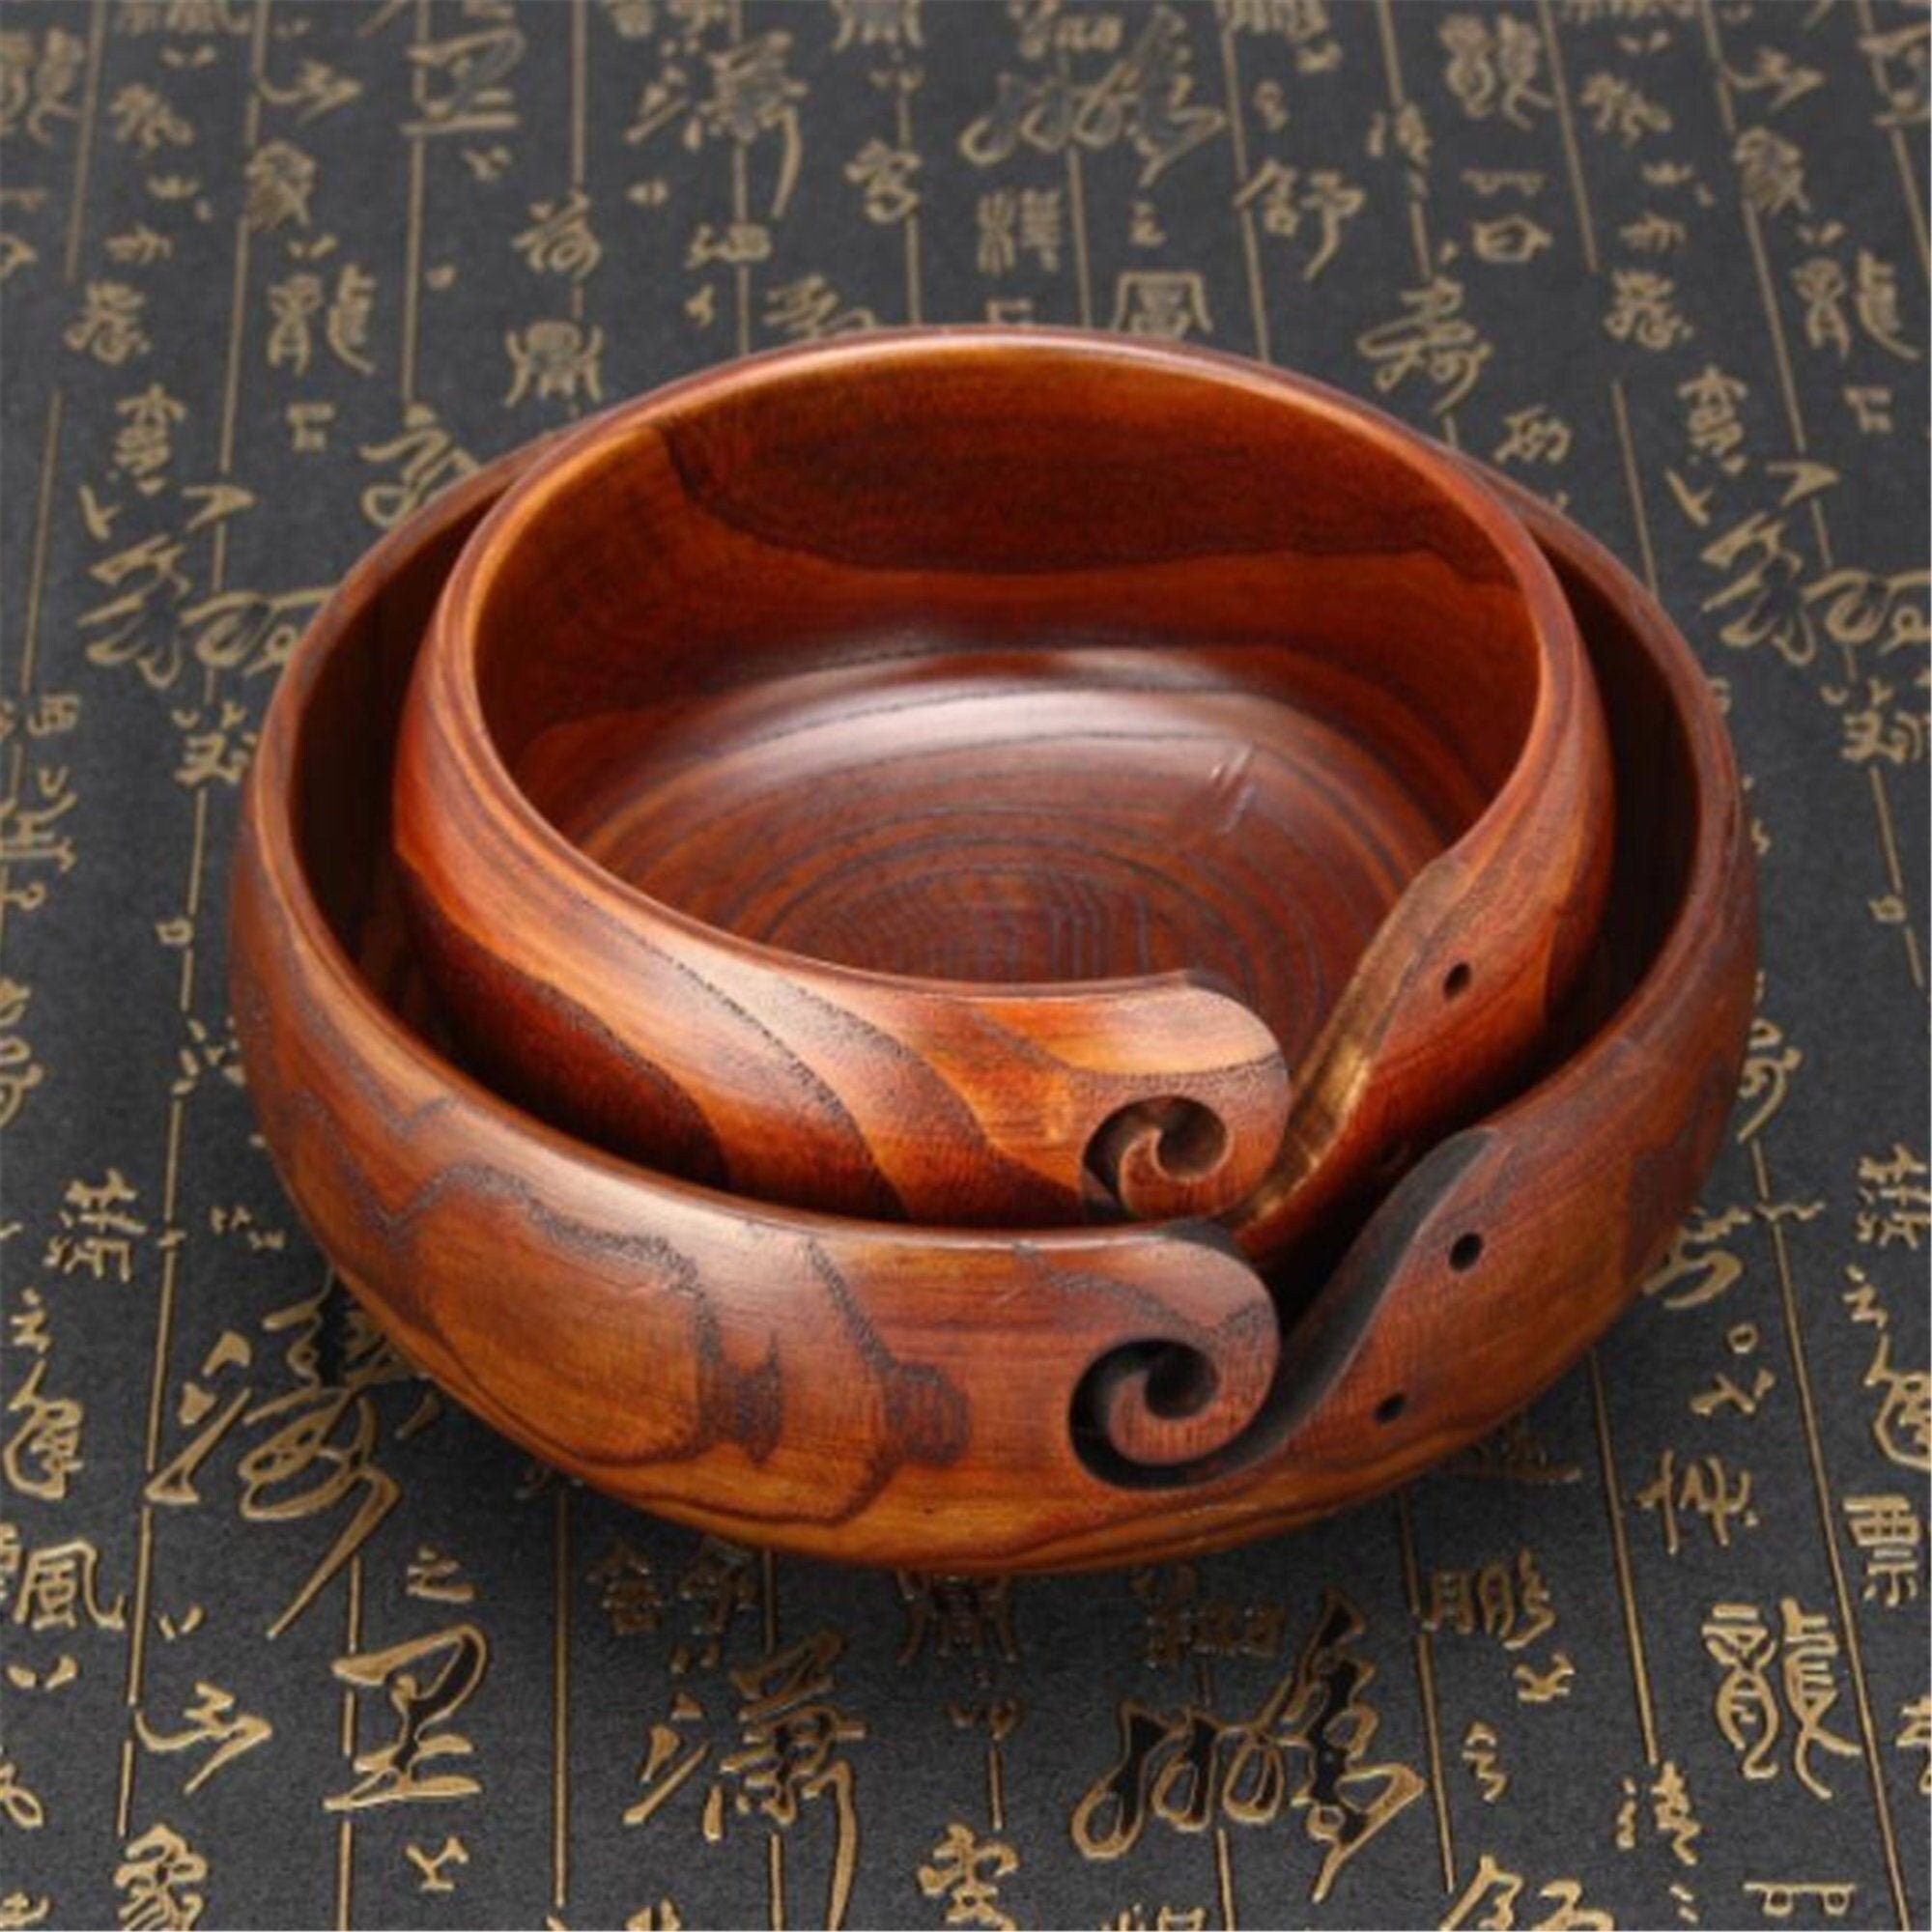 Wooden Yarn Bowls for Crocheting with Holes Little World Yarn Bowl Chestnut Preventing Slipping and Tangles Handmade Craft Knitting Bowl Christmas Gift for Knitting Lovers 